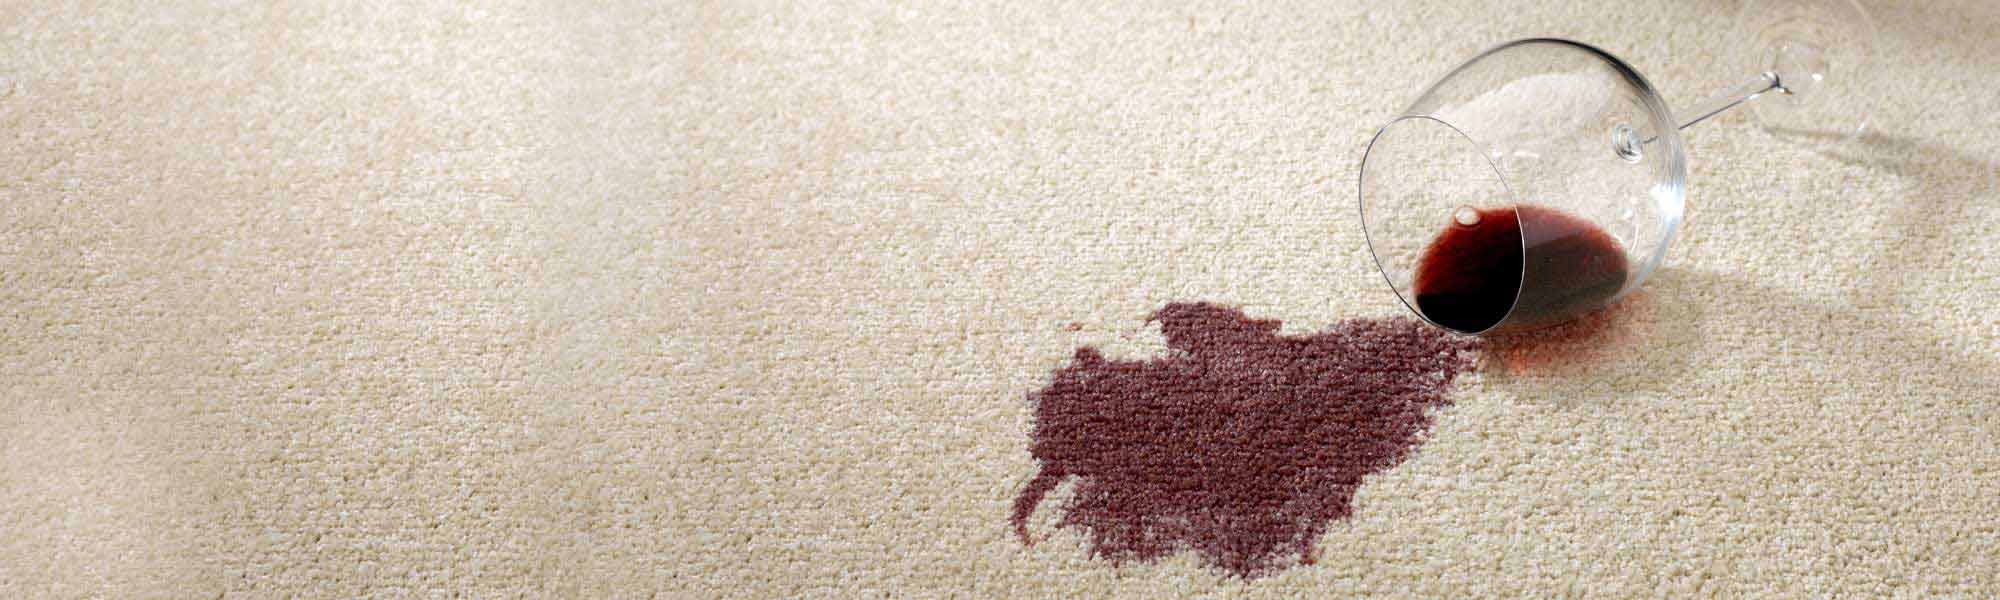 Professional Carpet Stain Removal Service by Chem-Dry Select Gets Rid of Carpet Stains in Arlington WA